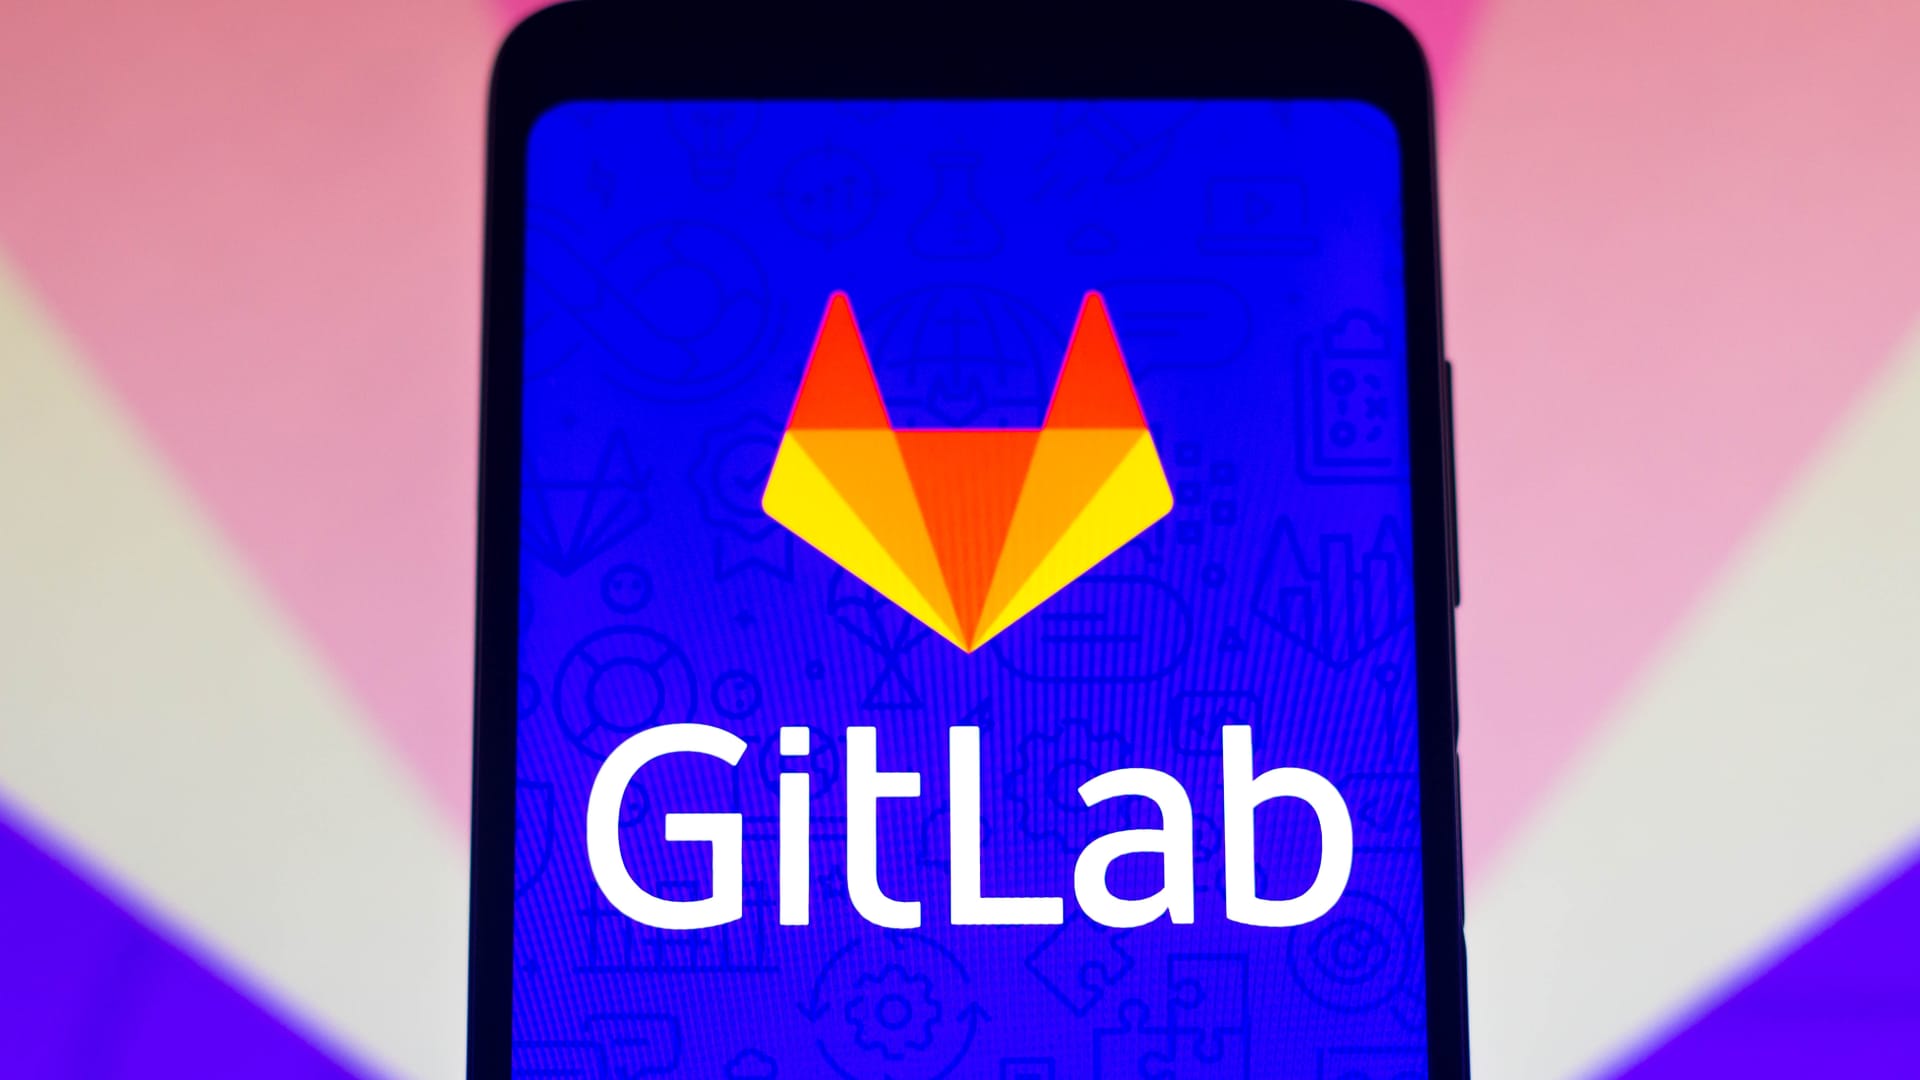 GitLab to cut 7% of workforce, or about 130 employees, sending shares down